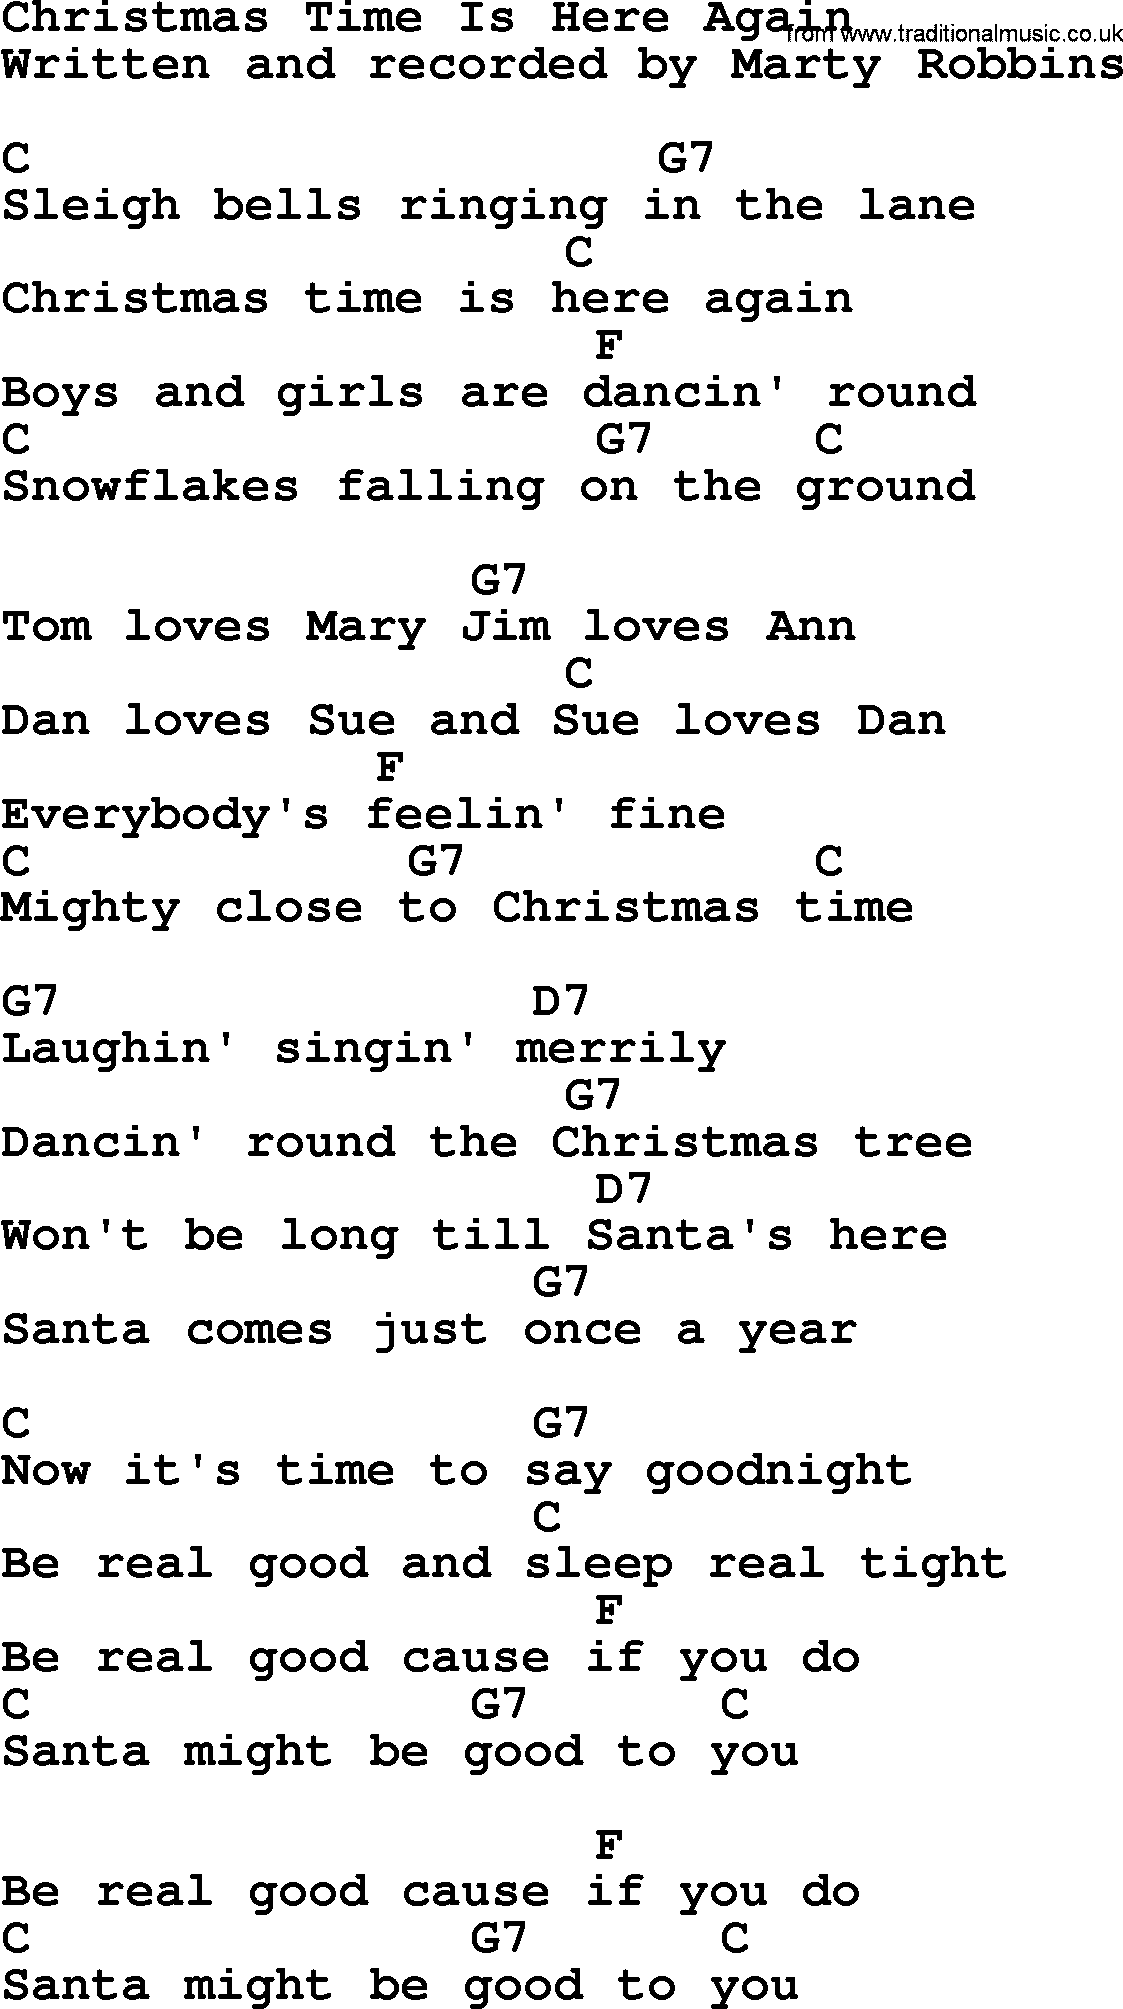 Marty Robbins song: Christmas Time Is Here Again, lyrics and chords